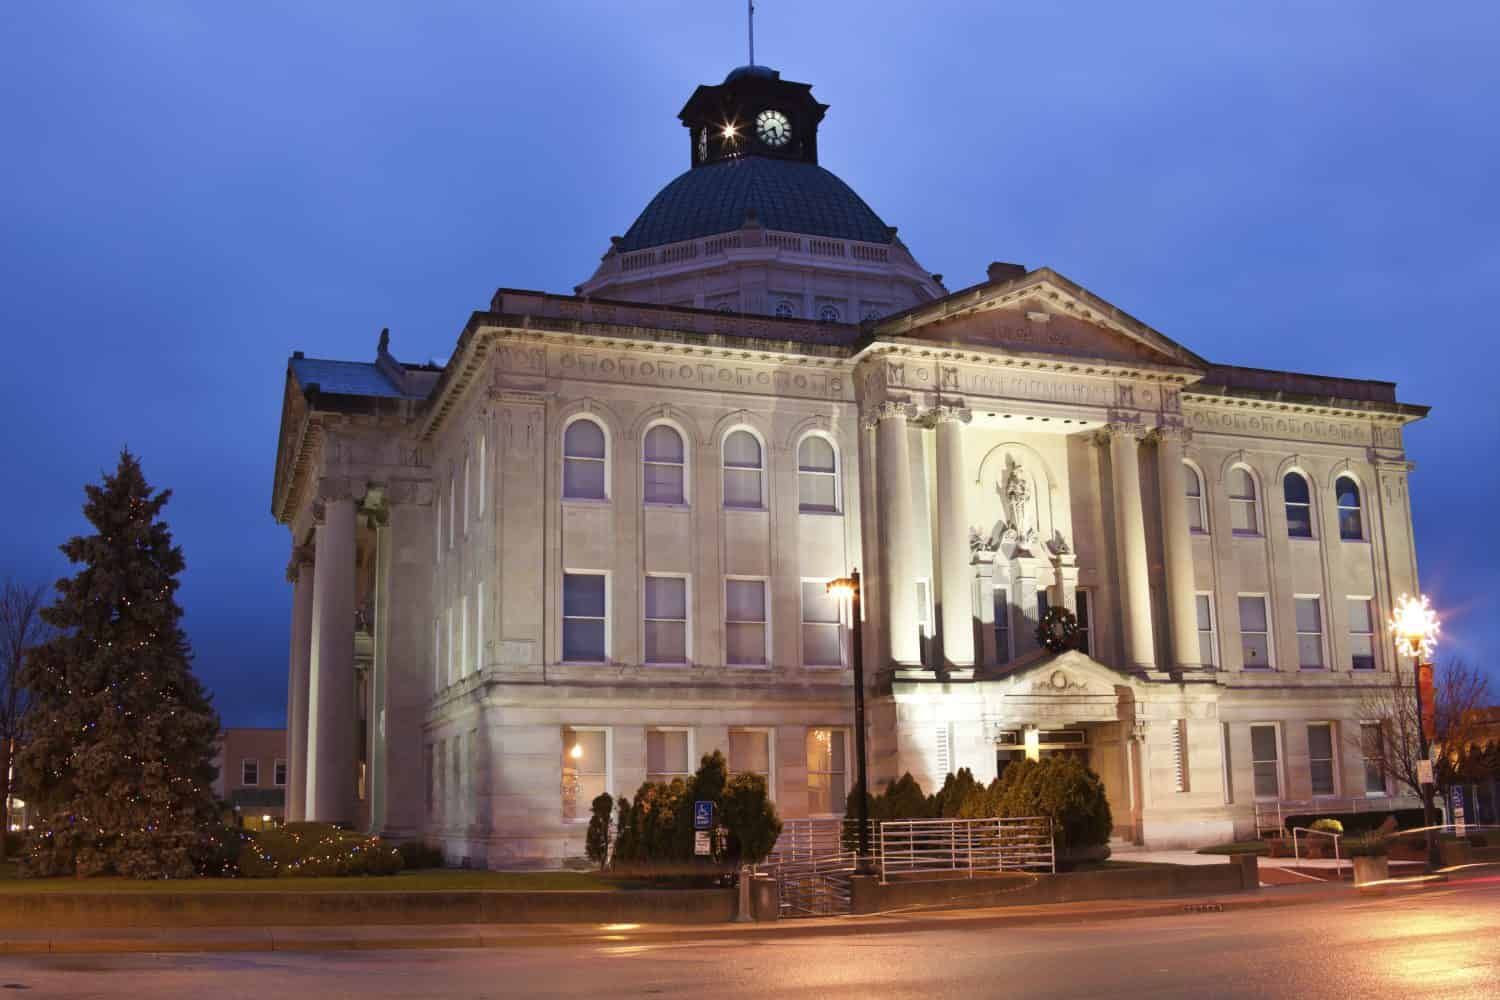 Boone County historic courthouse in Lebanon, Indiana